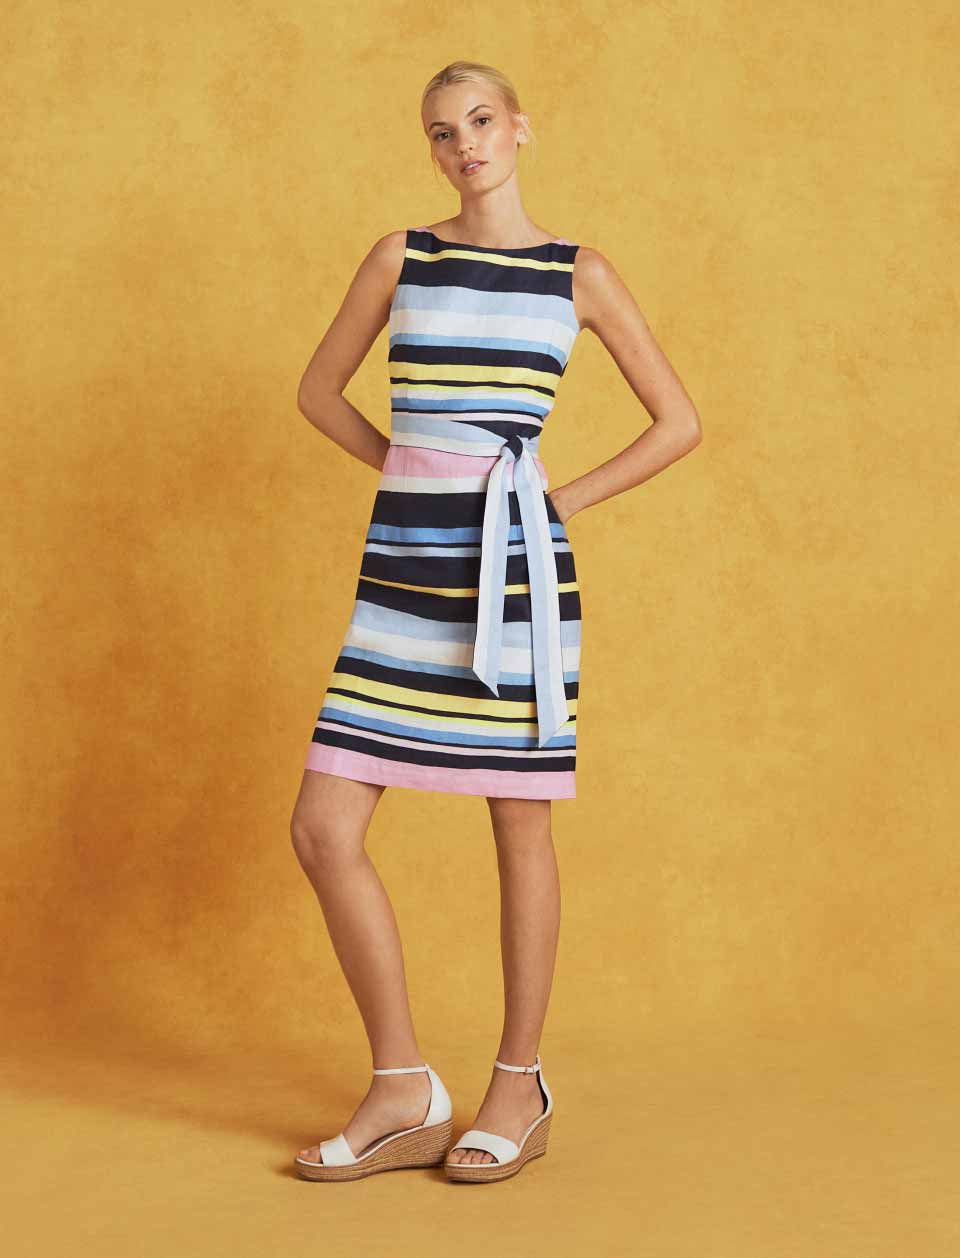 Model photographed in front of a yellow background wearing a striped linen dress.